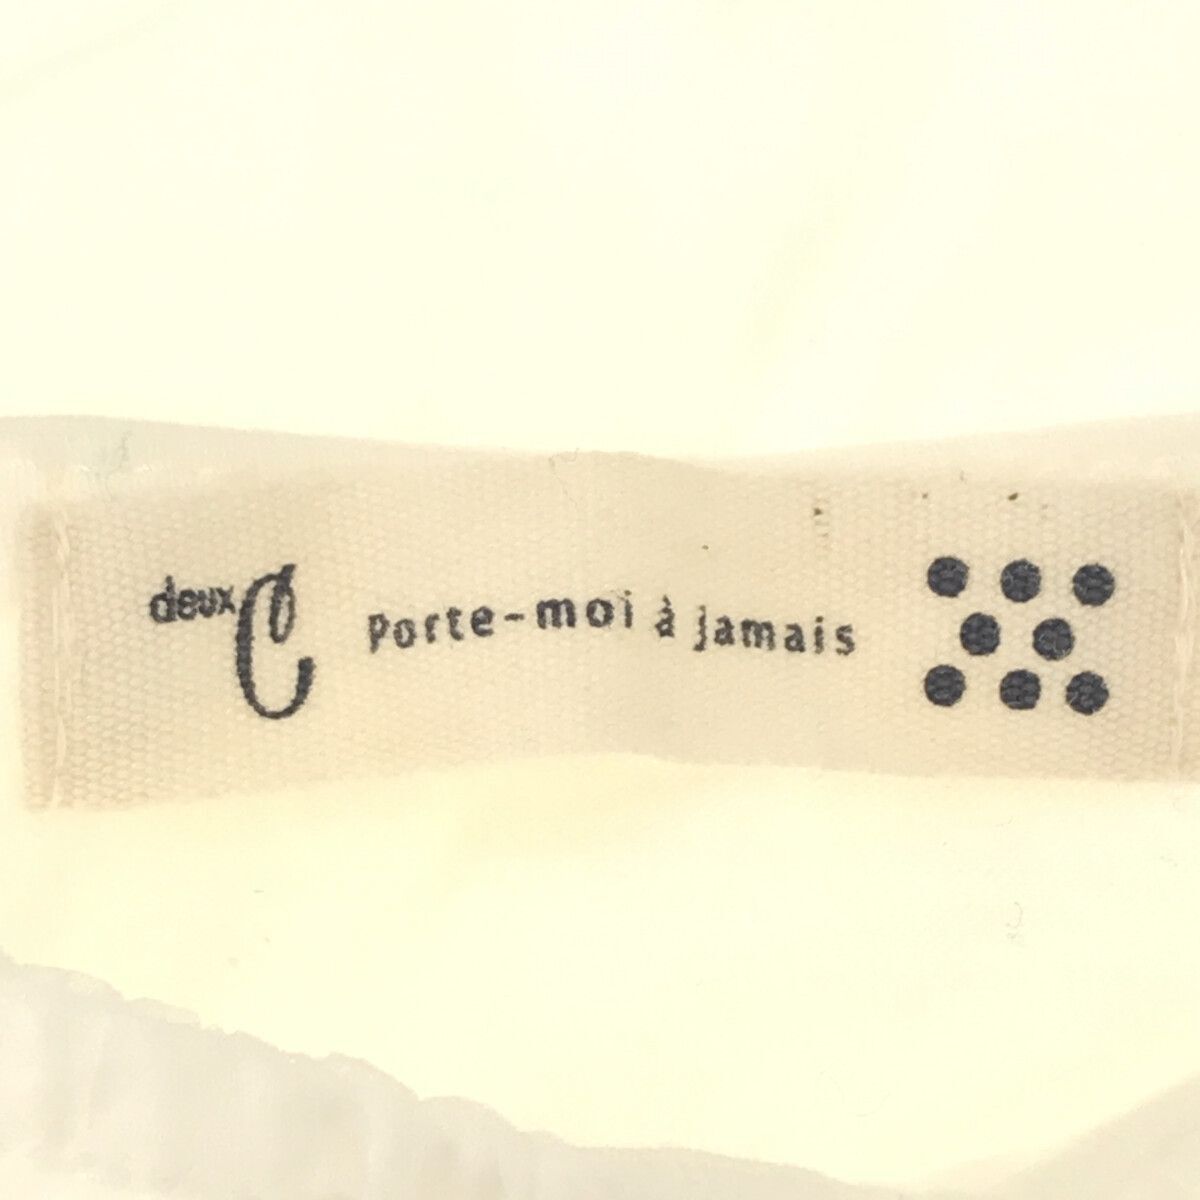 * beautiful goods * deux C Porte-moi a jamaisduse- tops cut and sewn 7 minute height simple lady's white 901-3736 free shipping 